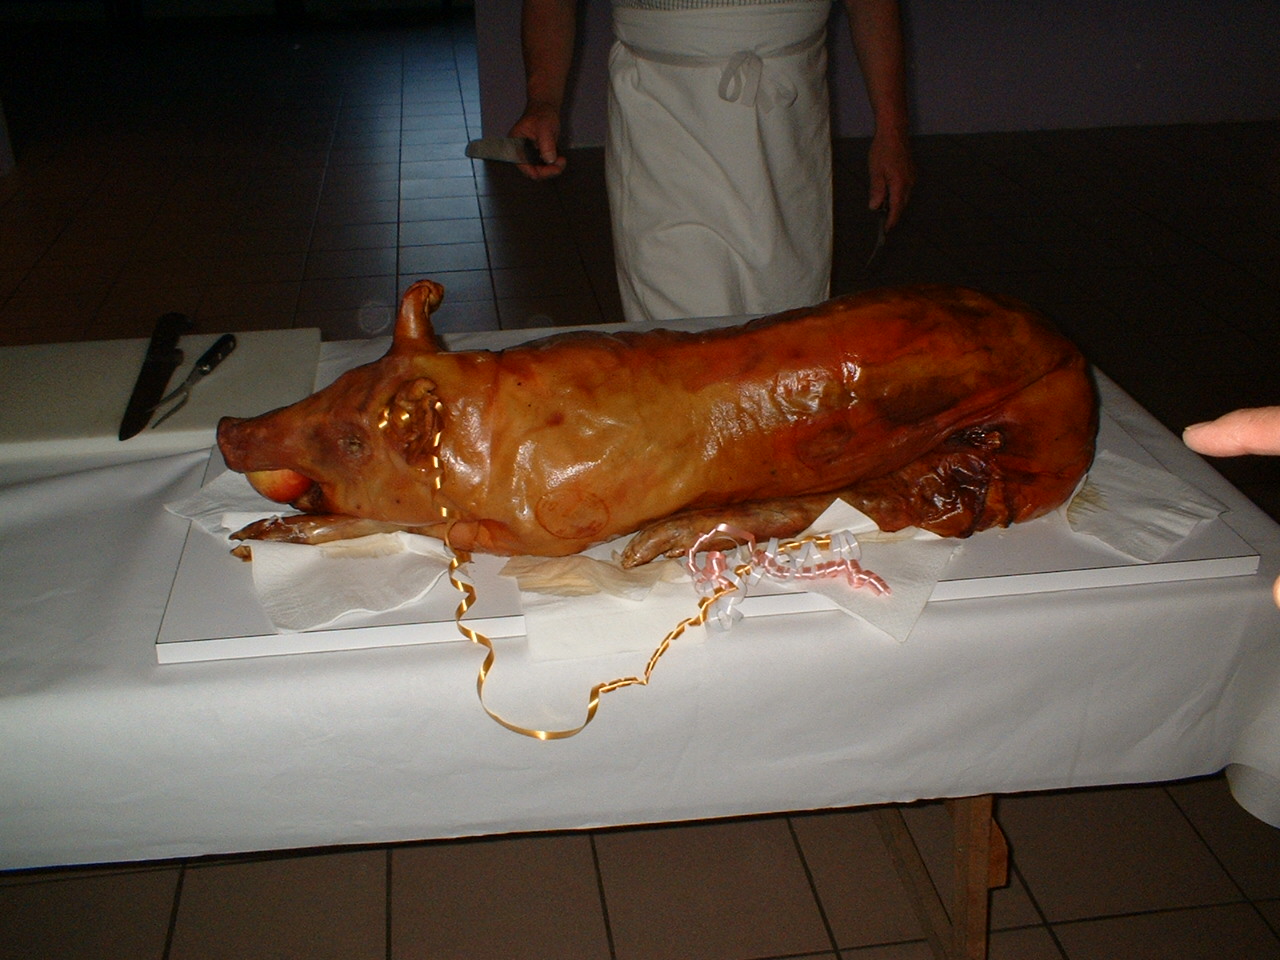 a partially cooked roast pig with orange and yellow paint